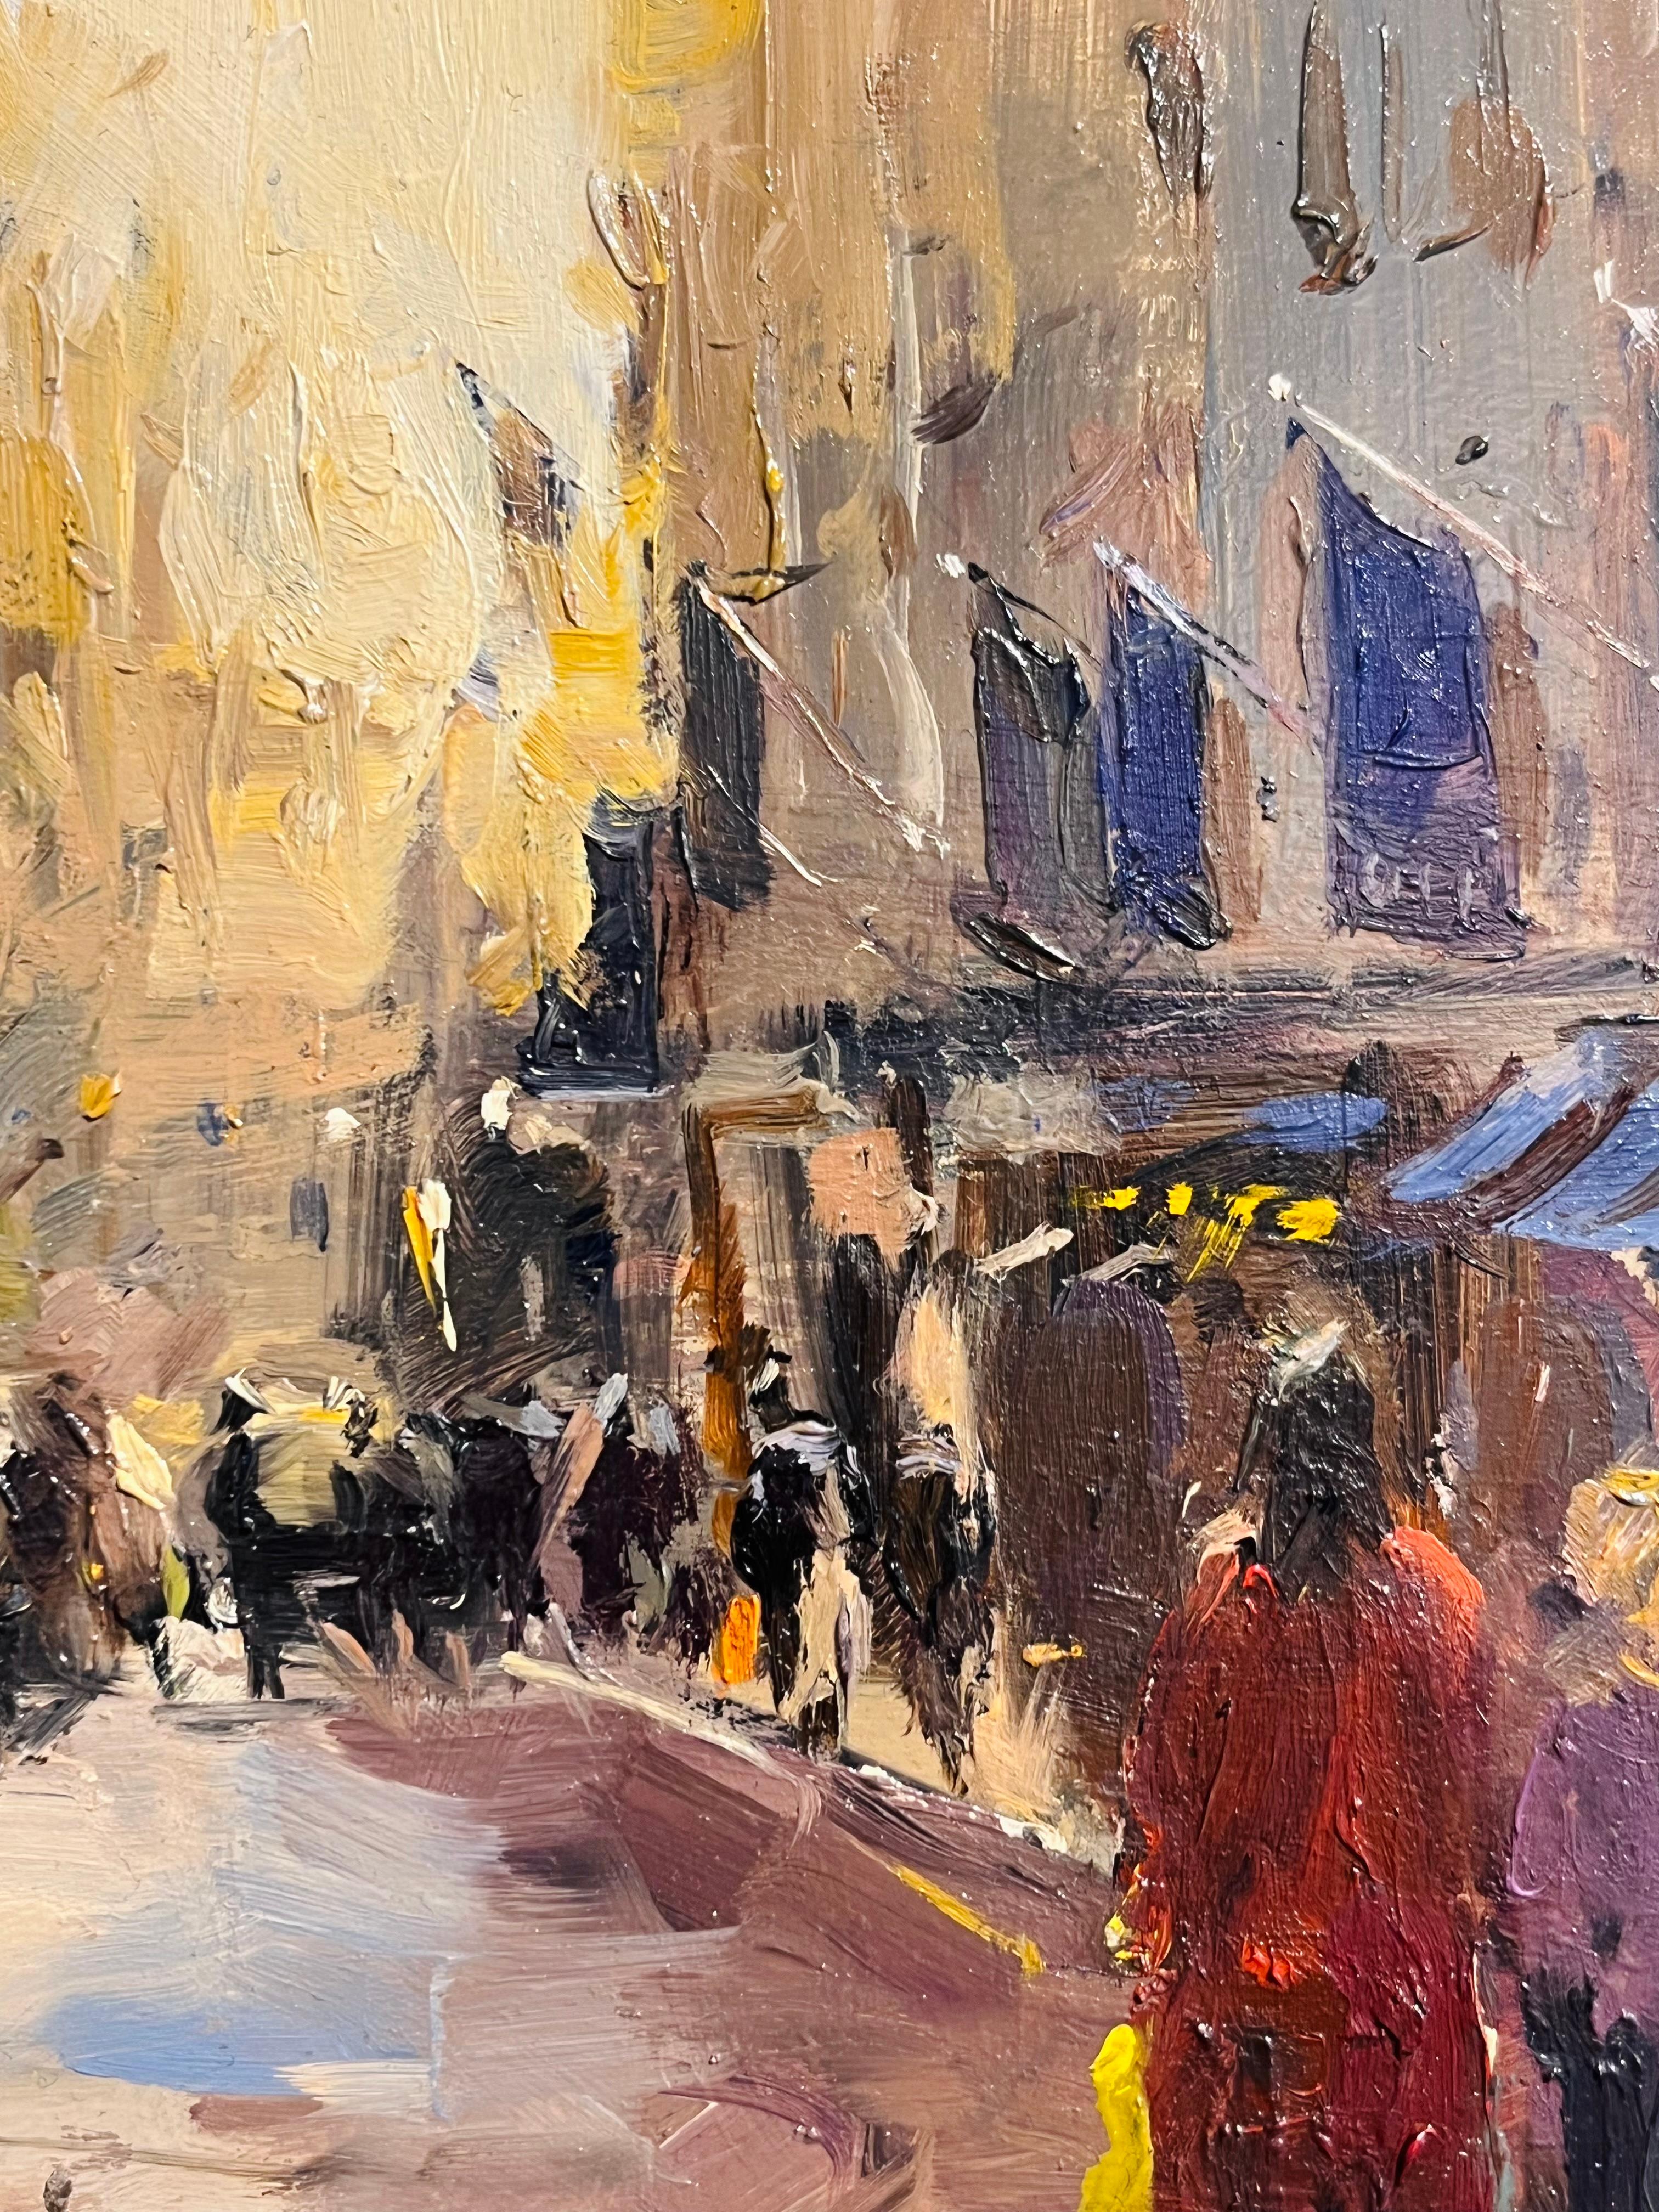 New Bond Street-original impressionism cityscape oil painting-contemporary Art - Impressionist Painting by Tushar Sabale